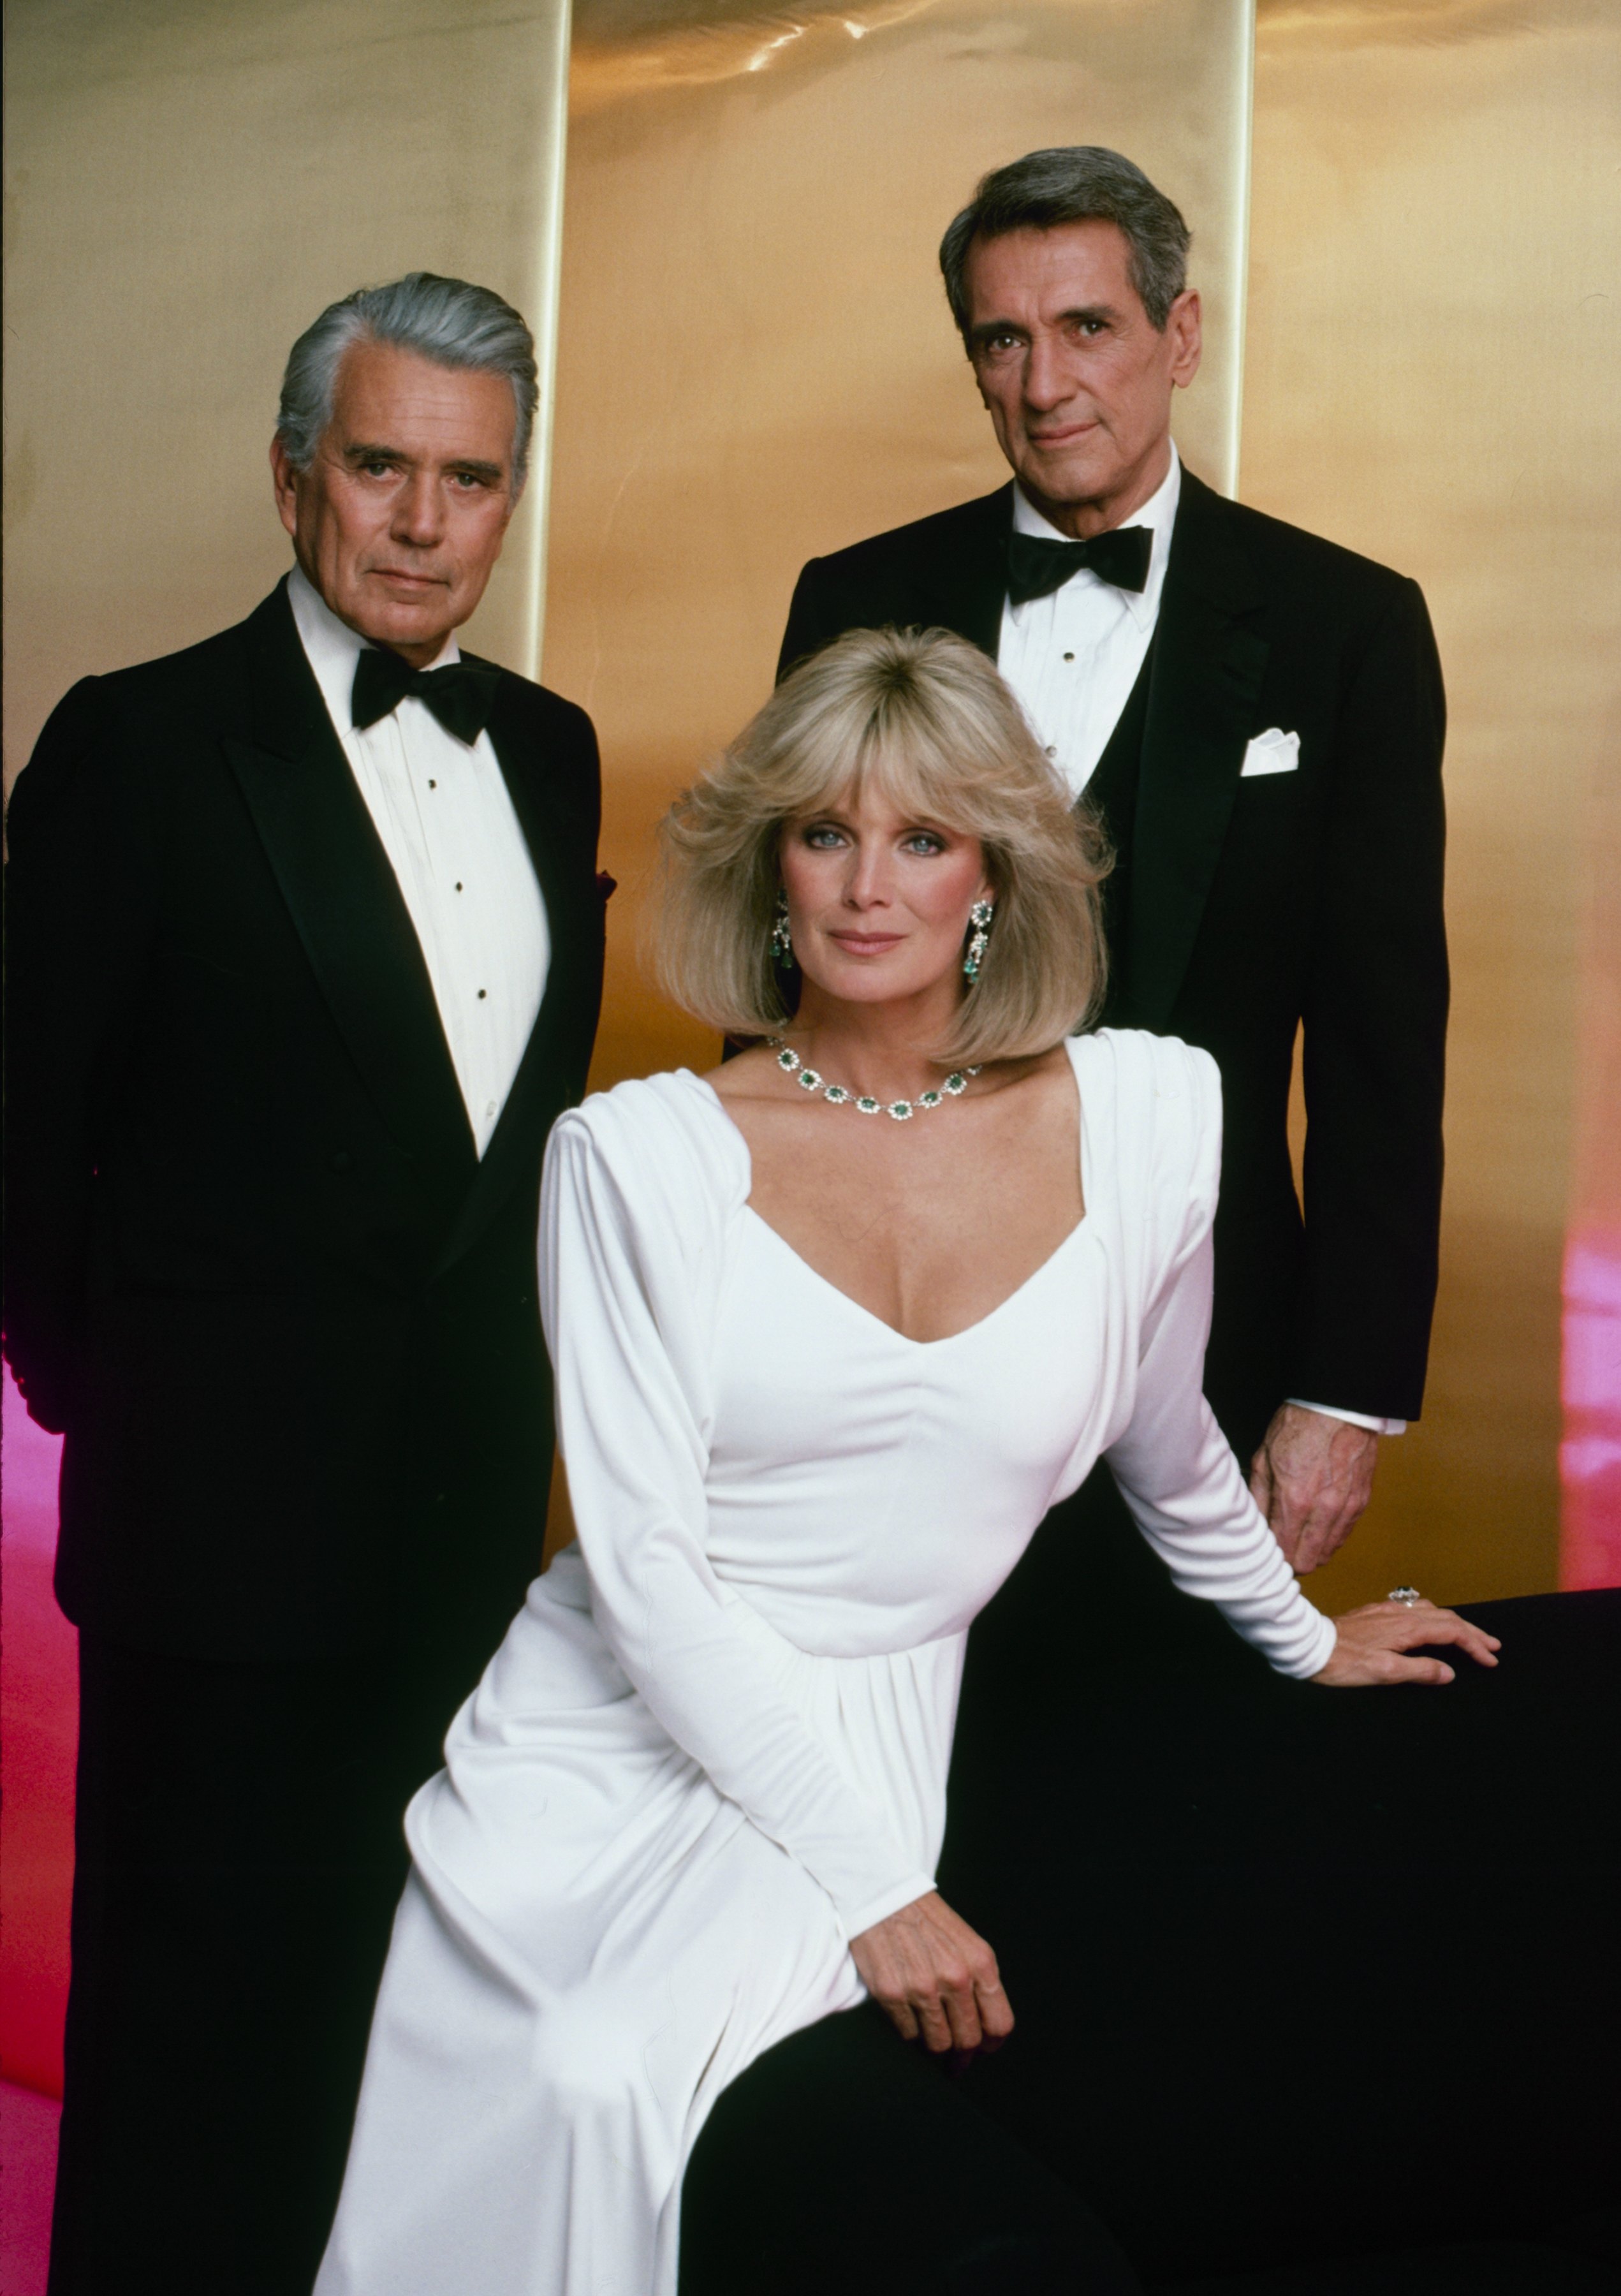 John Forsythe, Linda Evans, and Rock Hudson as their characters from "Dynasty" in 1984. | Source: Getty Images